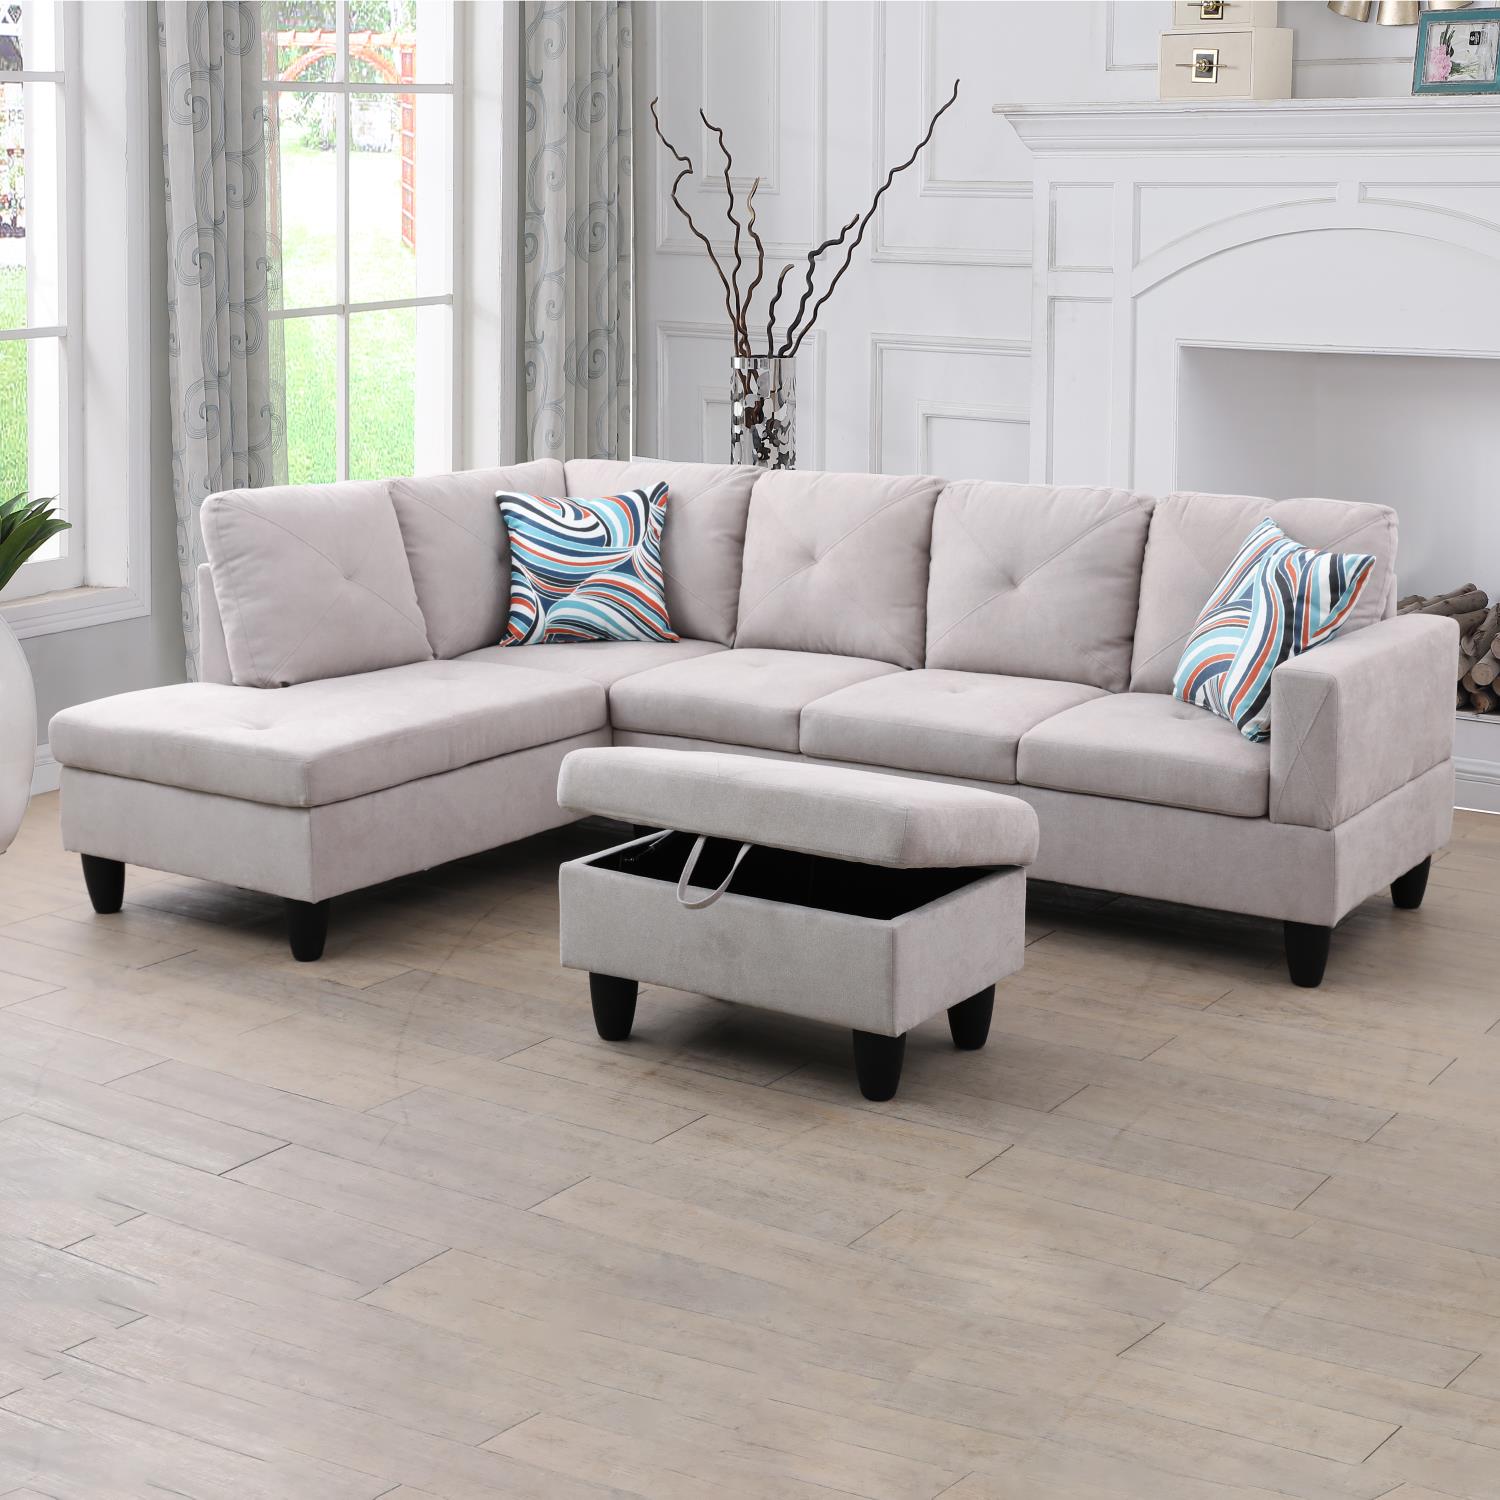 Ainehome Gray L-Shaped Flannel Combo Sofa Set